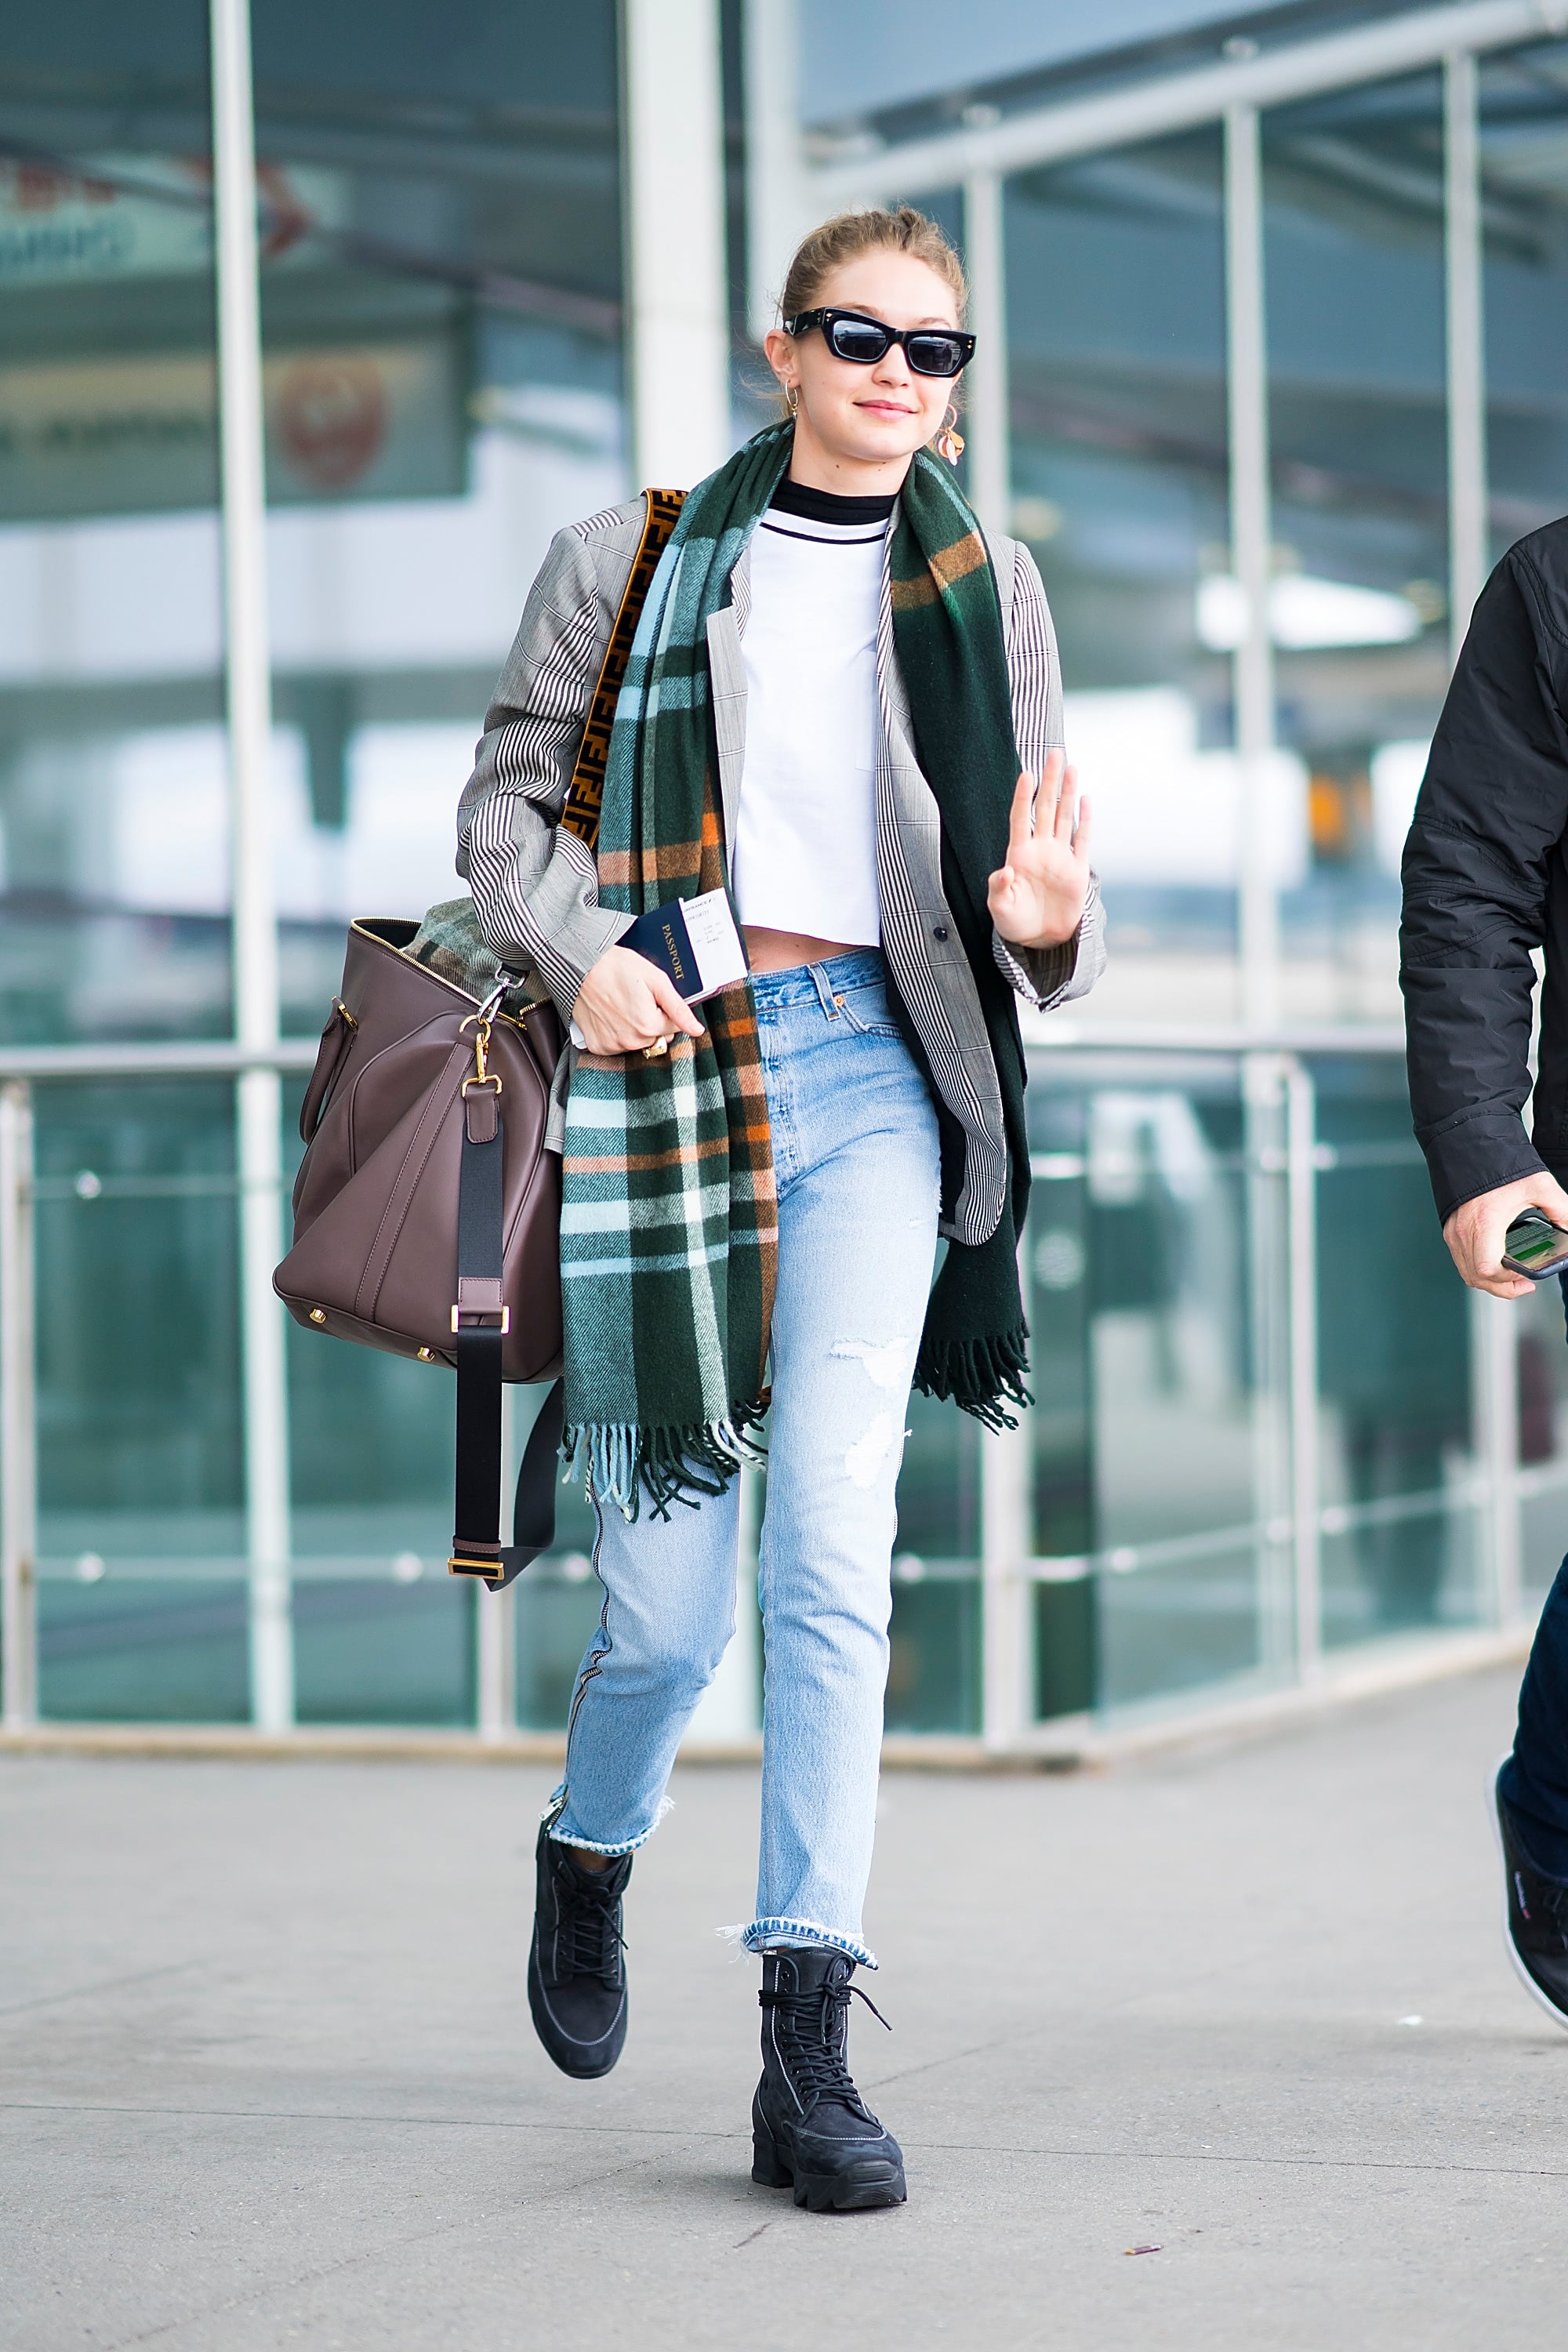 Celebrities who rocked airport fashion this week